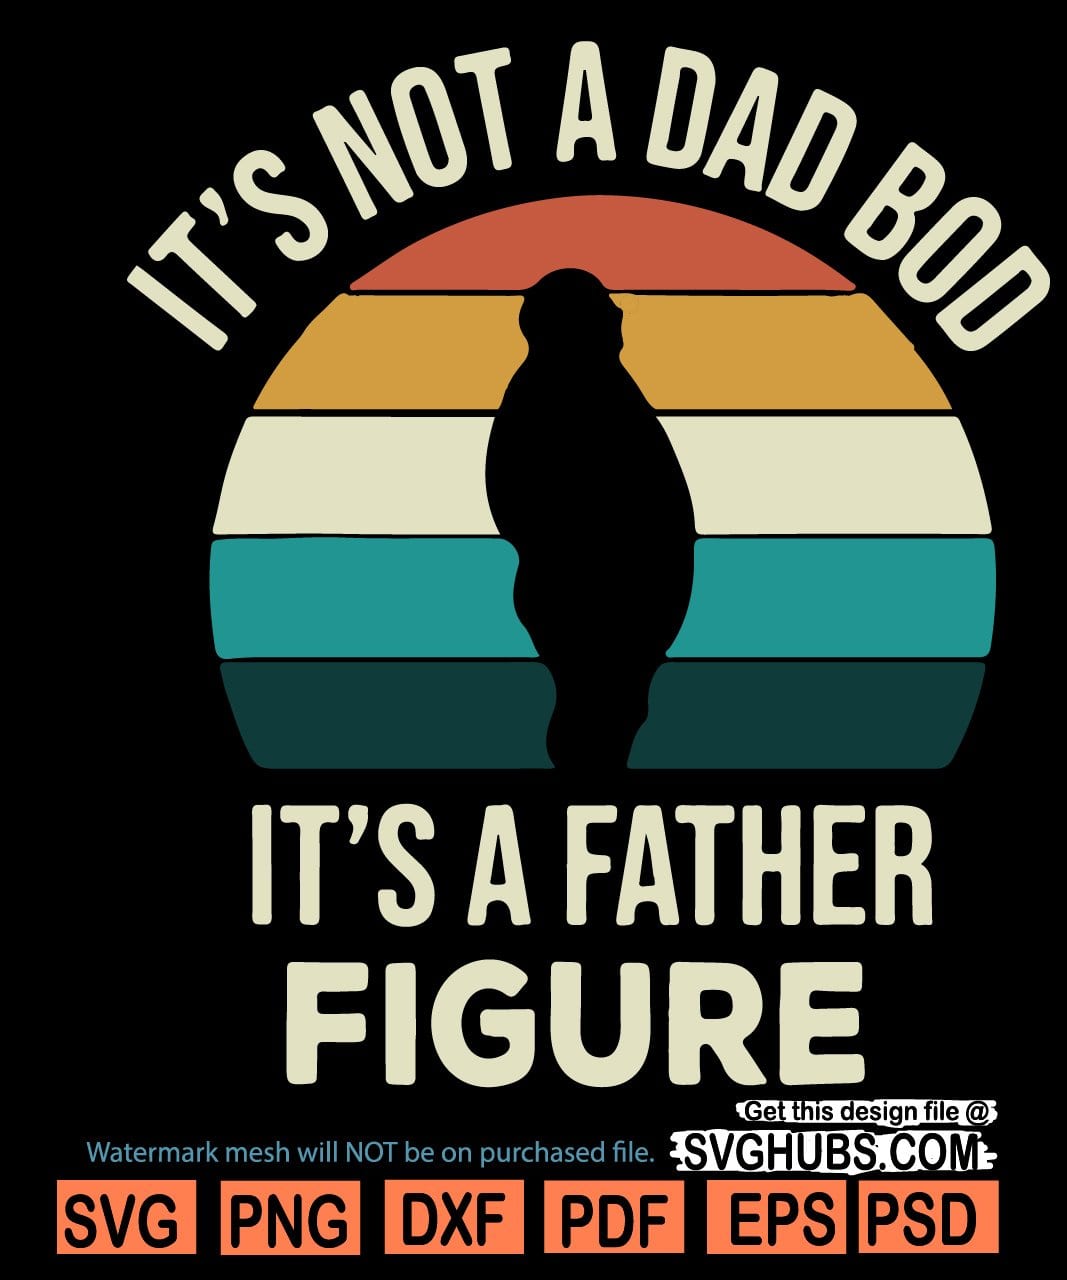 Download Its Not A Dad Bod Its A Father Figure Svg Father Figure Svg Fathers Day Svg Svg Hubs